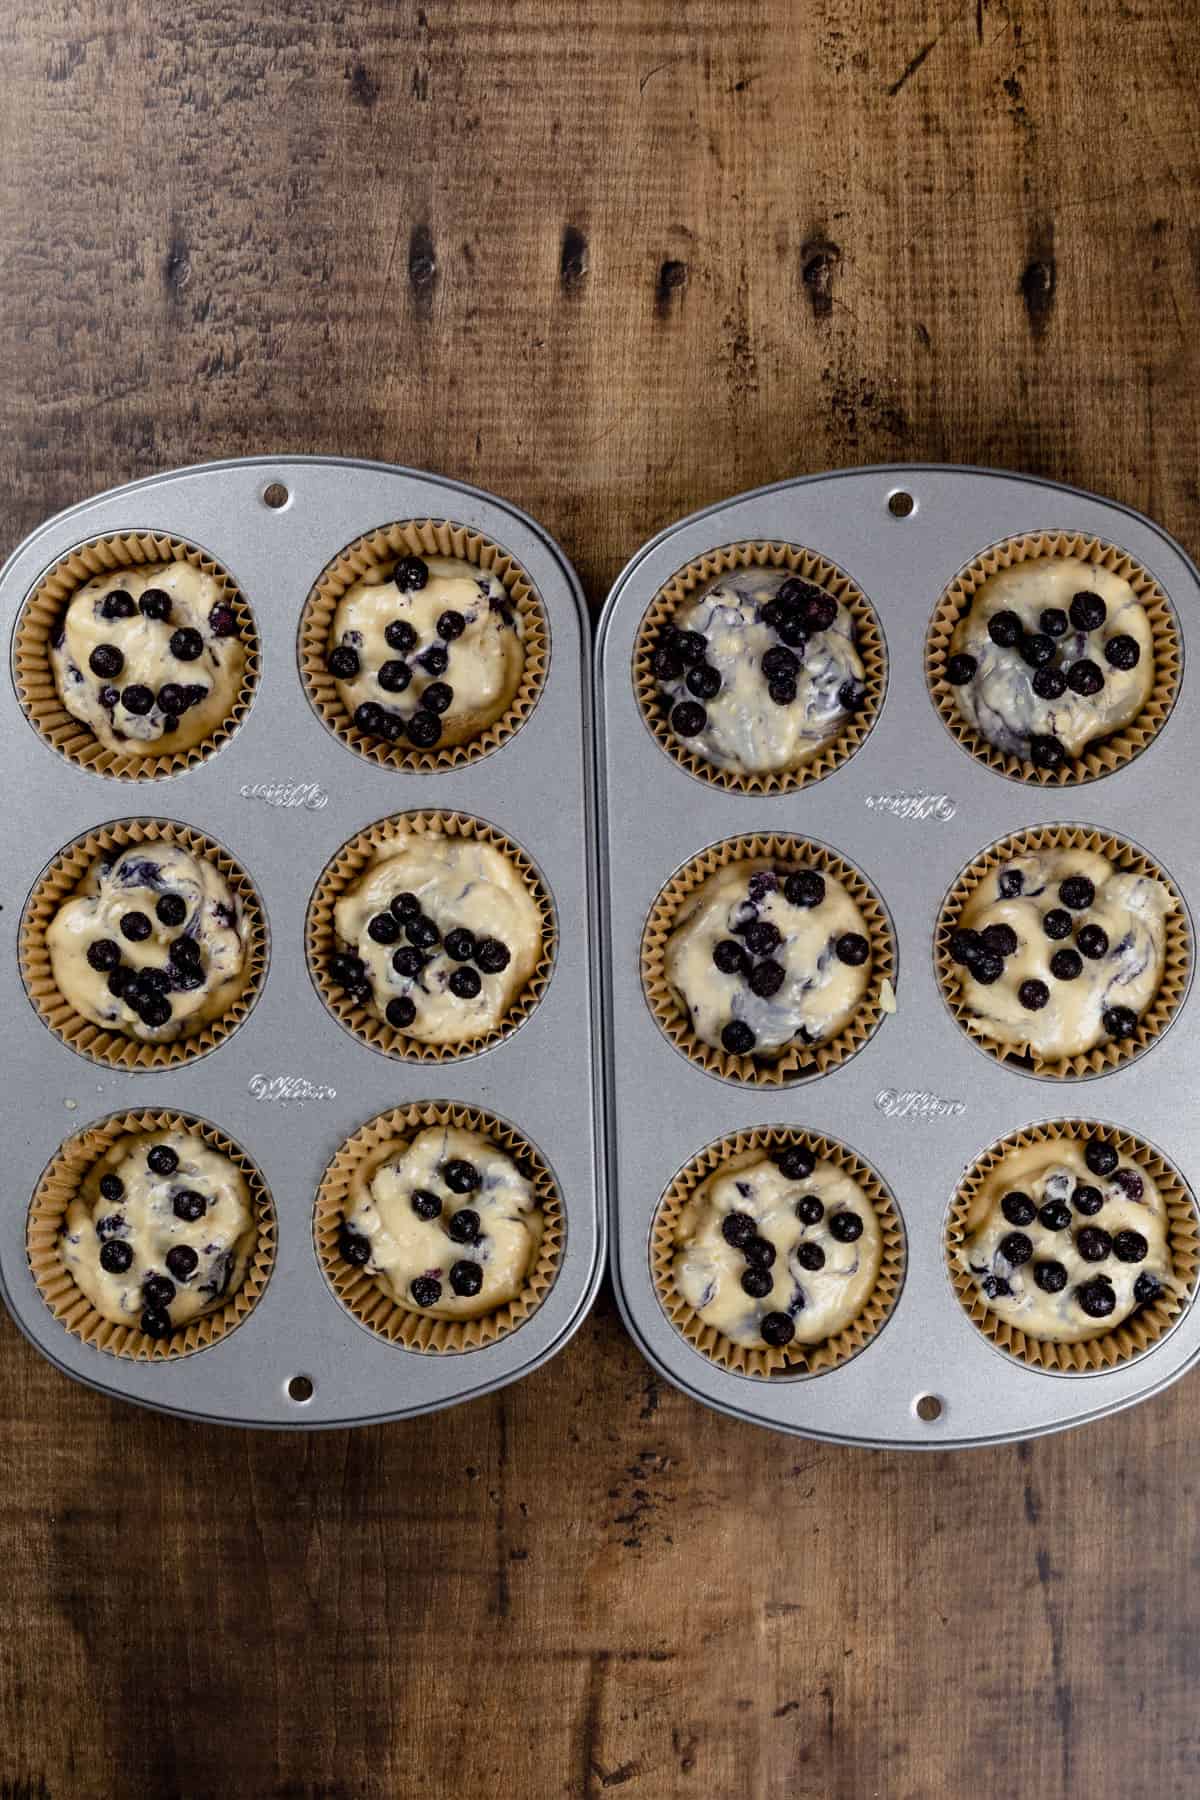 12 blueberry muffins in a tray before baking.